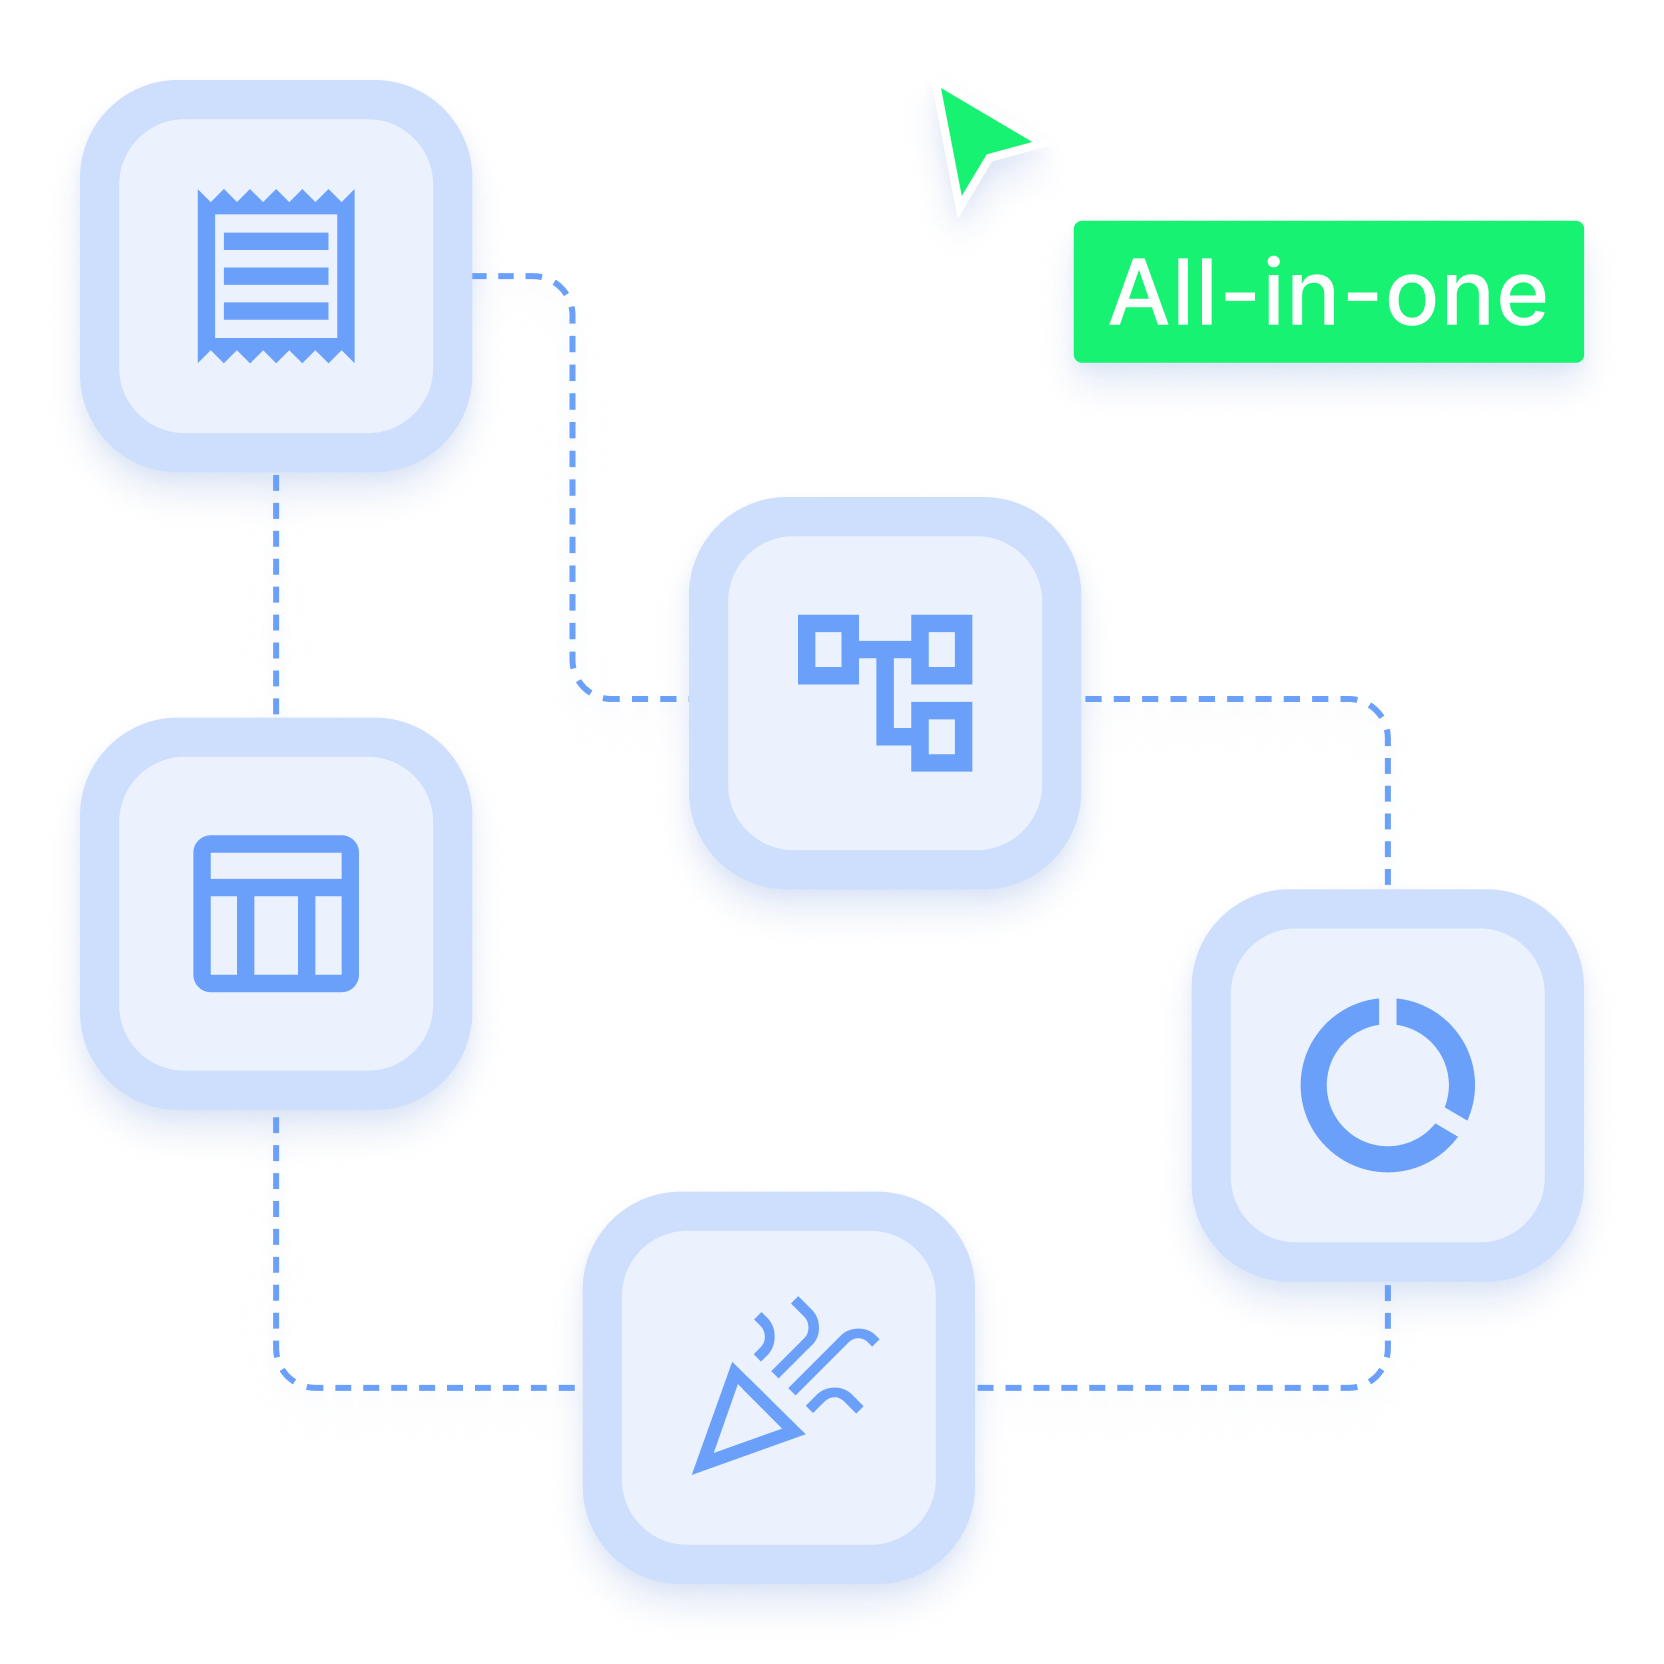 All-in-one cloud-based system